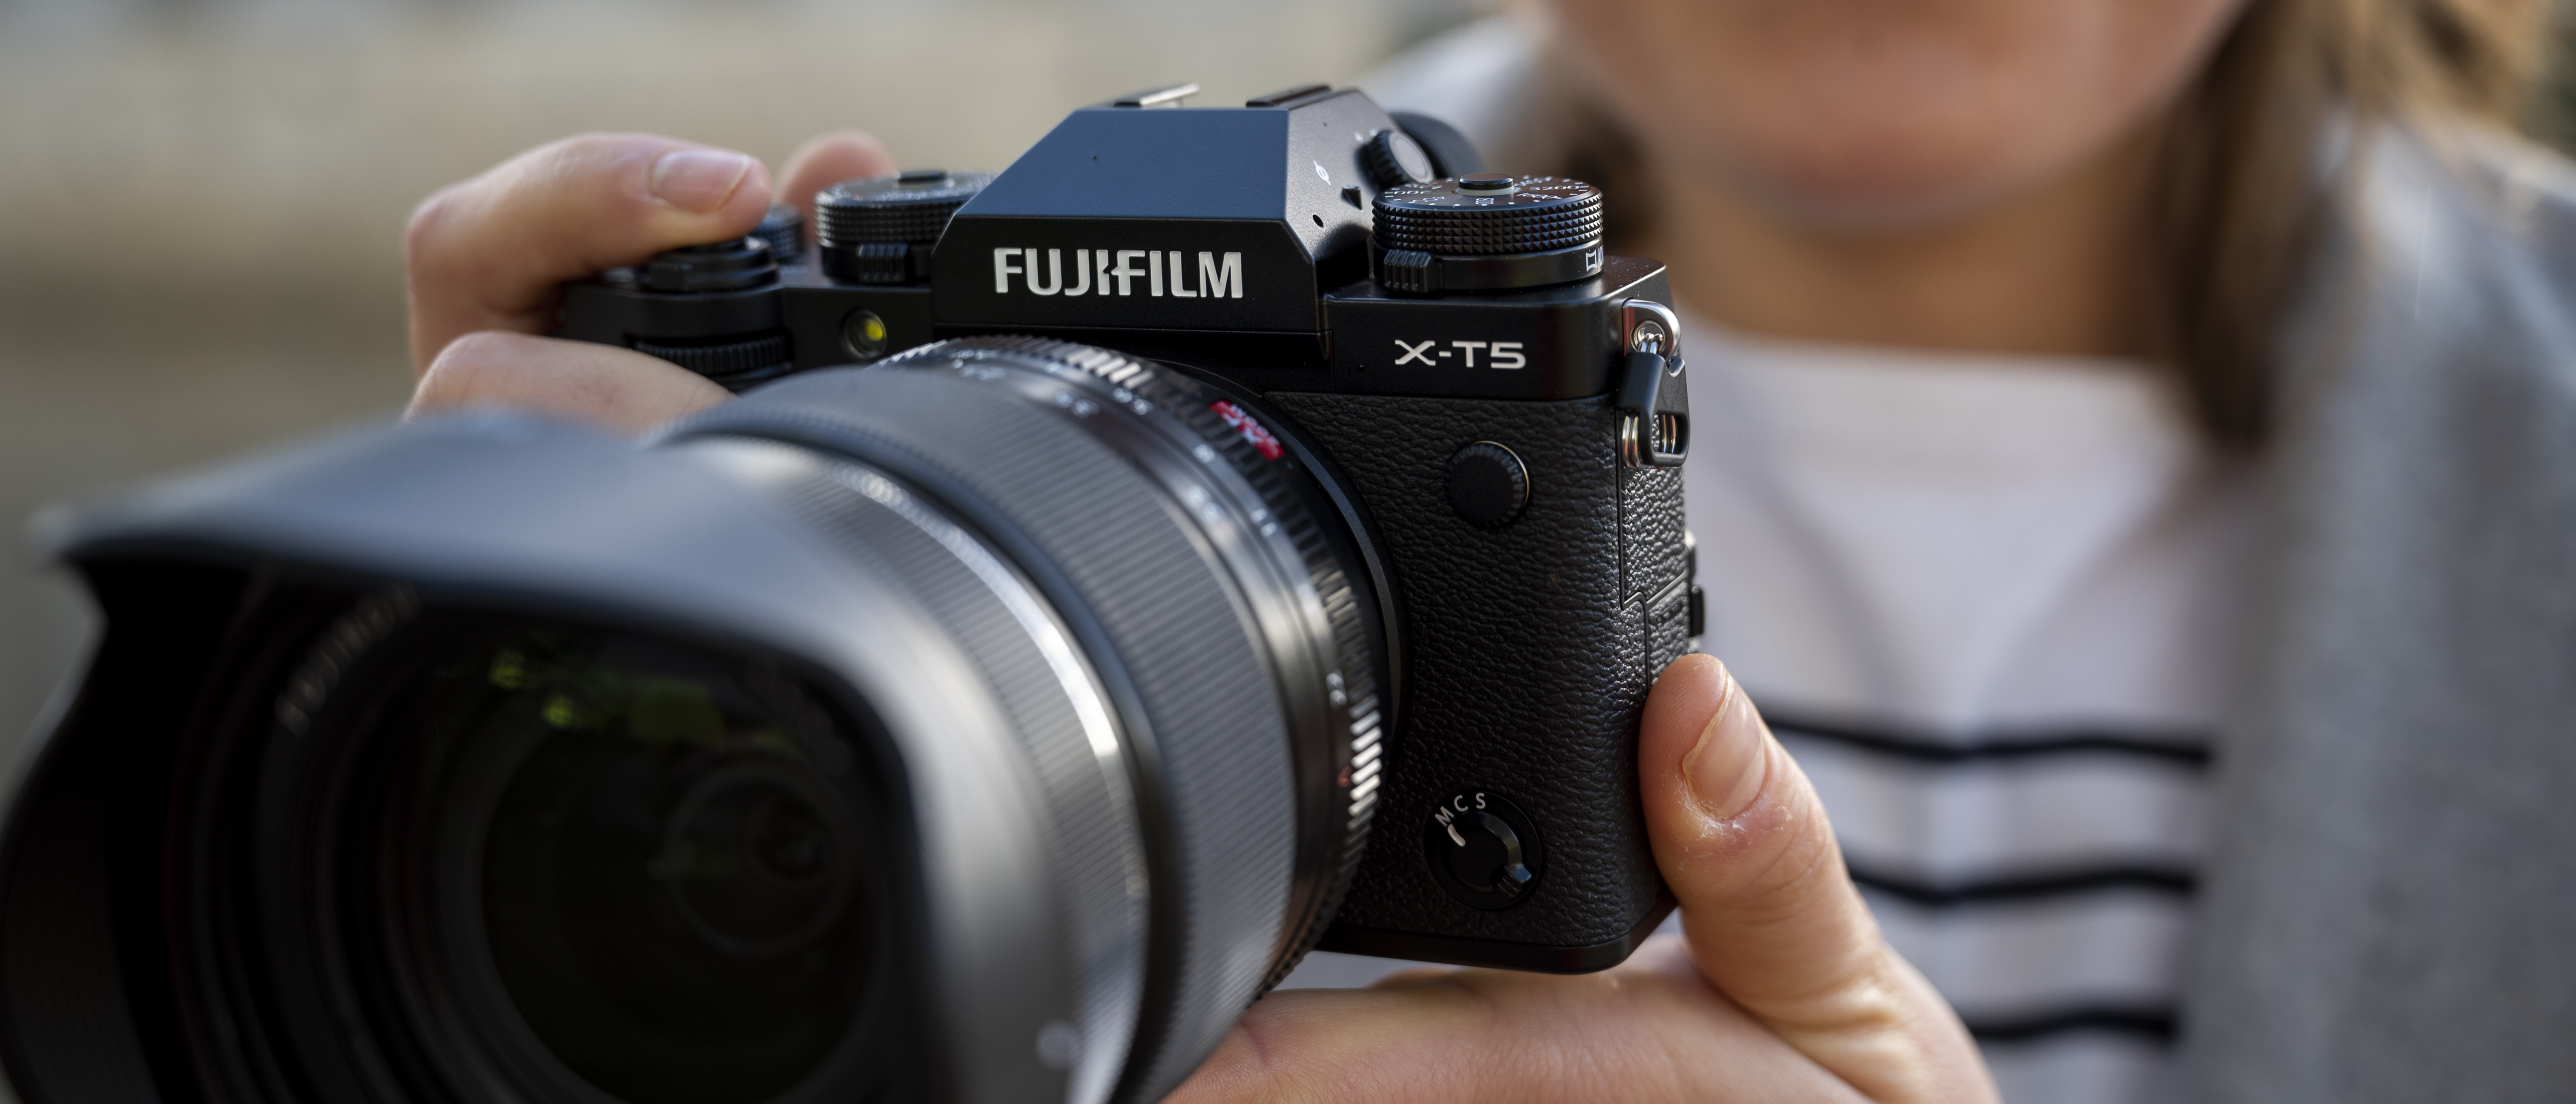 Fujifilm X-T5 Review: Beautiful but Flawed – Jerred Z Photography